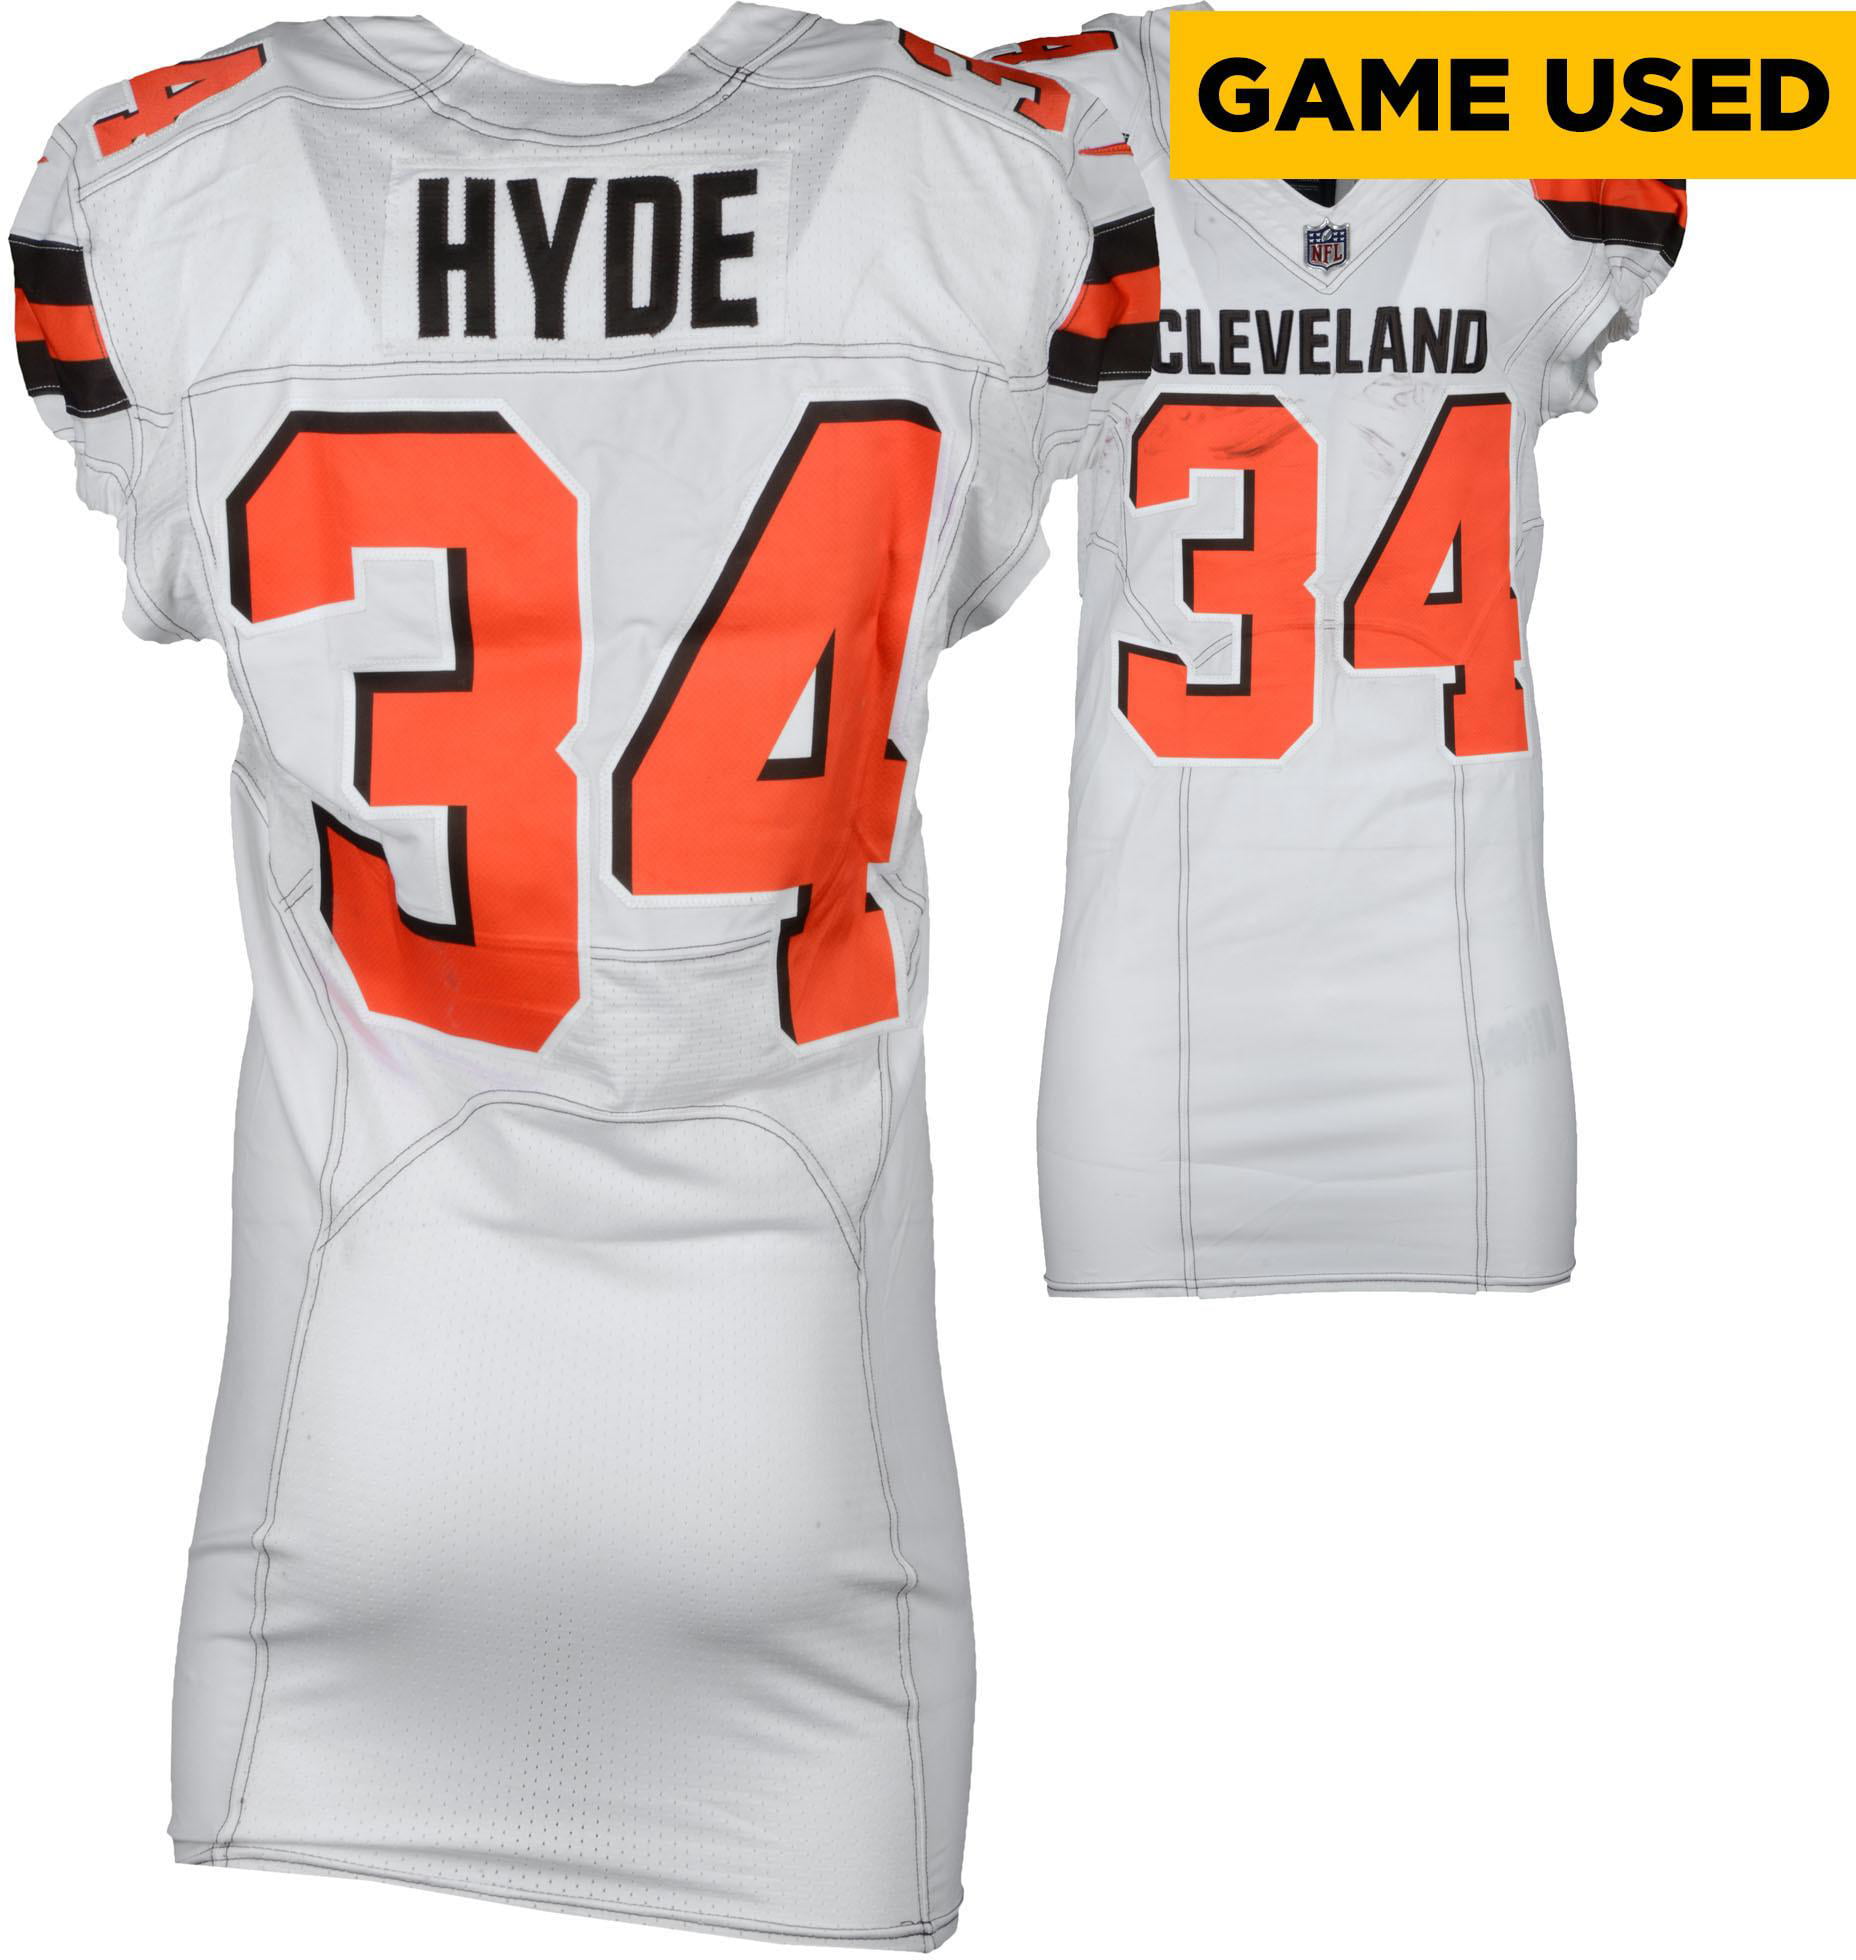 carlos hyde authentic jersey